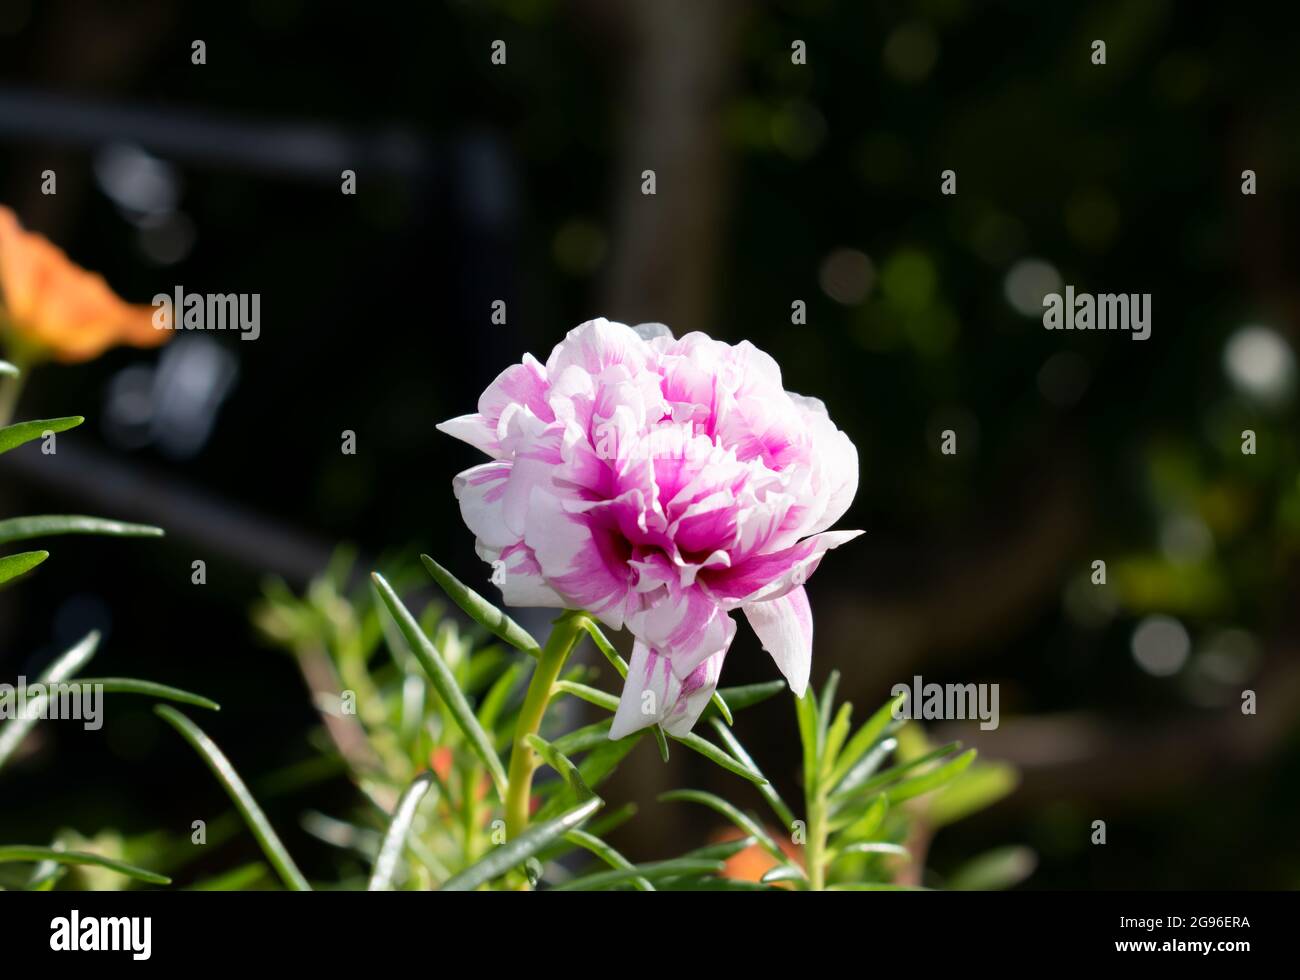 A single pink and white double portulaca grandiflora flower growing from a stem with a blurred nature background of plants, flowers and leaves. Stock Photo